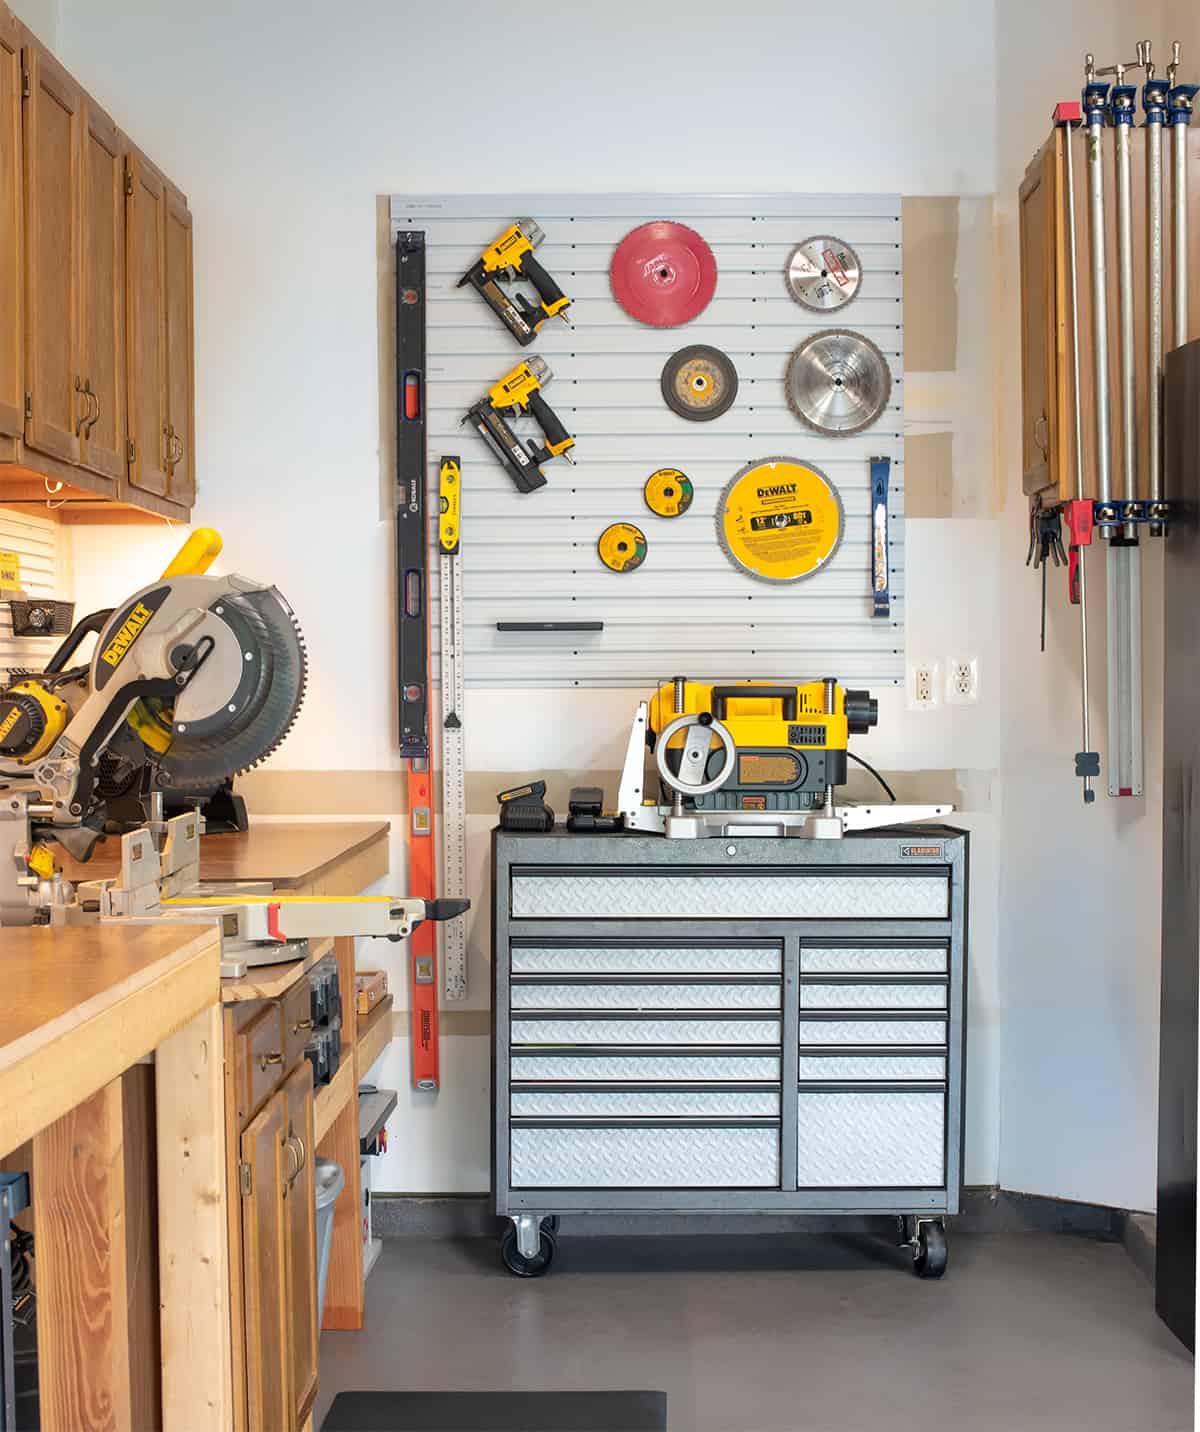 Organized garage with workbench, tool chest, and slatwall pegboard above tool chest.